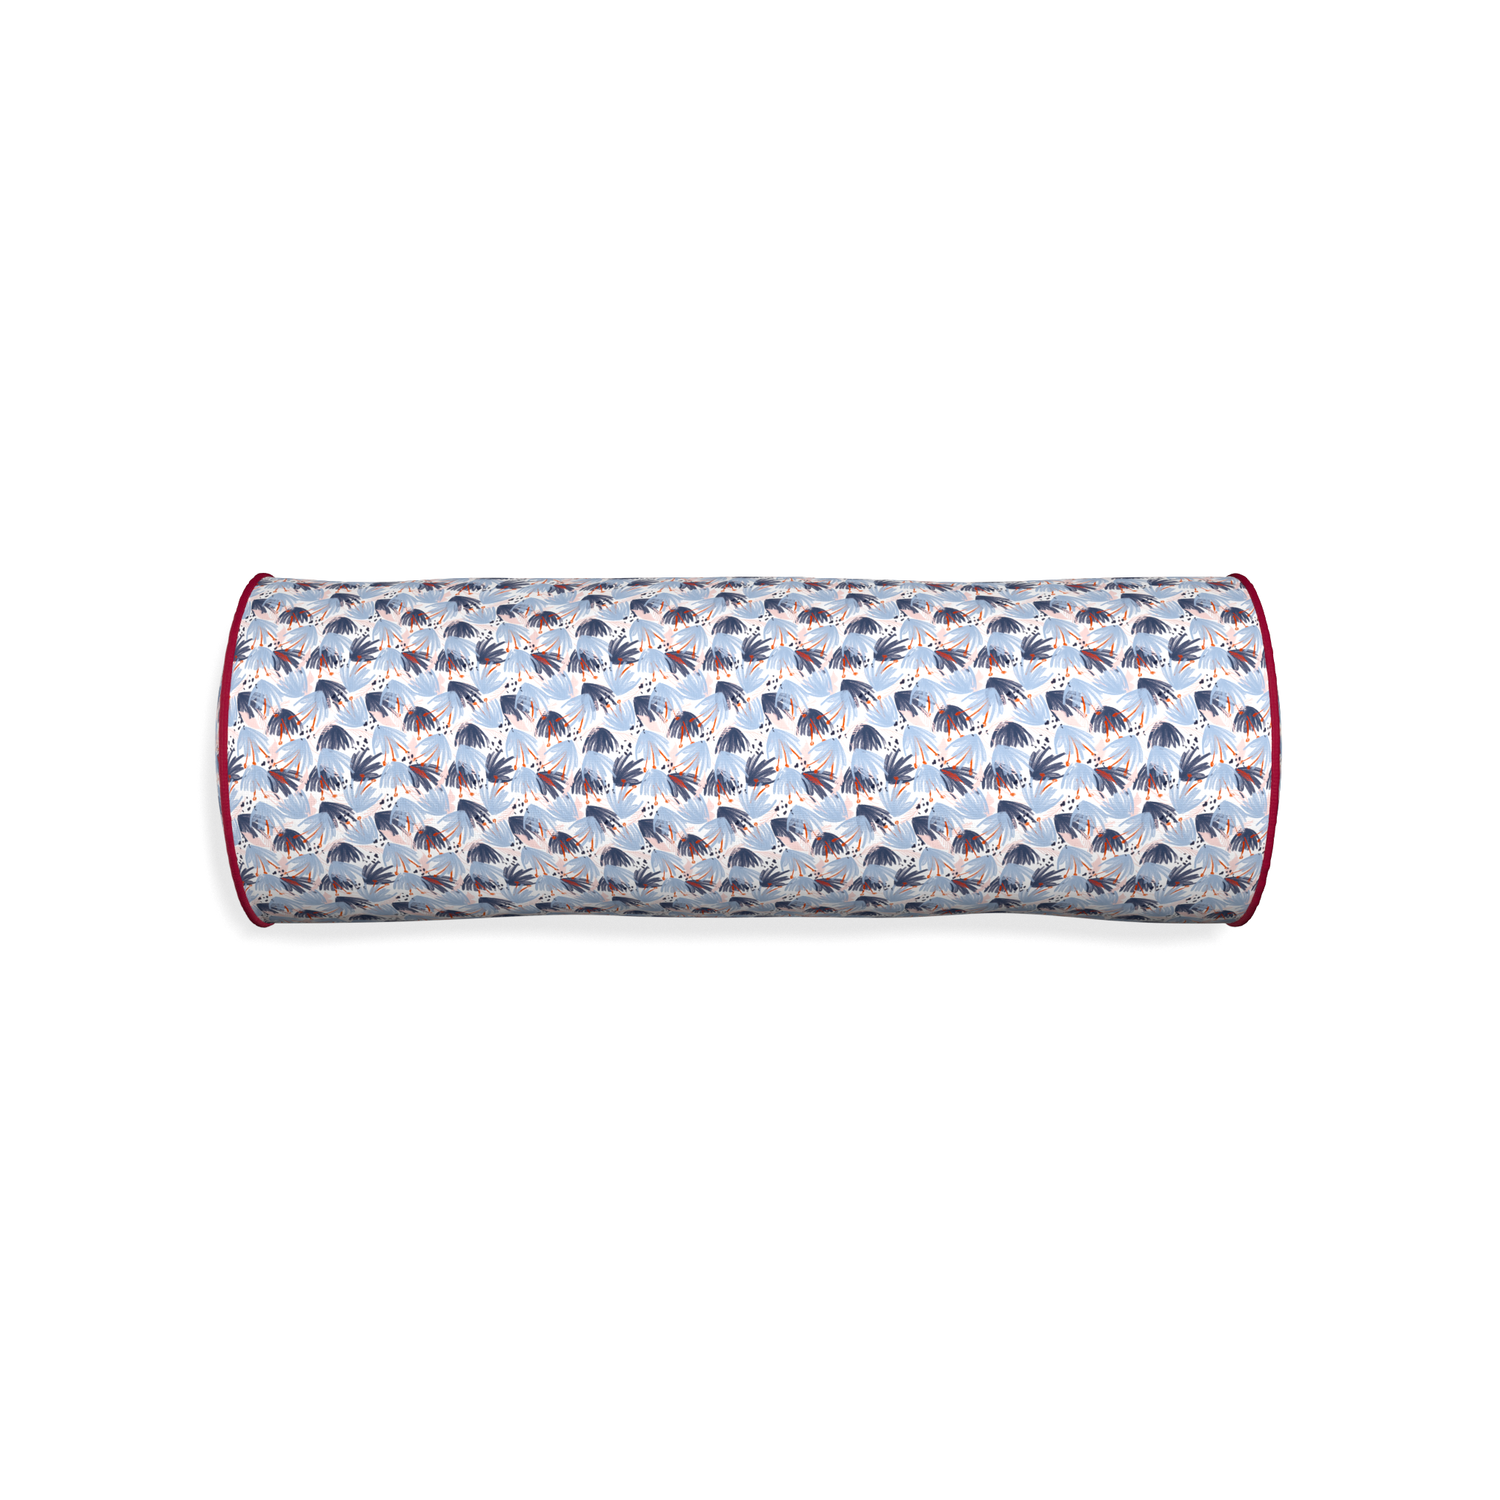 Bolster eden blue custom red and bluepillow with raspberry piping on white background